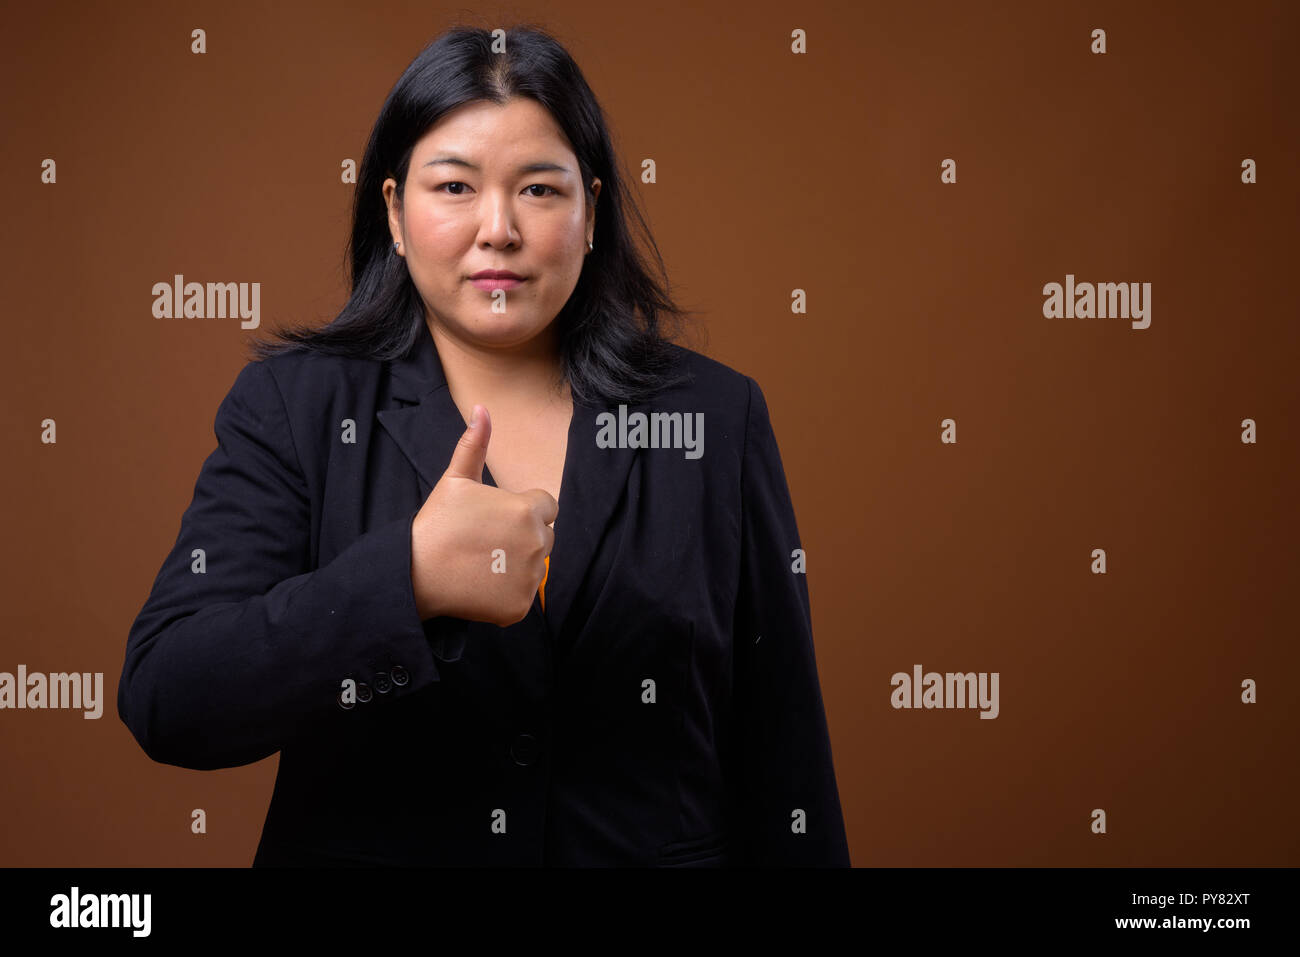 Beautiful overweight Asian businesswoman giving thumb up Stock Photo